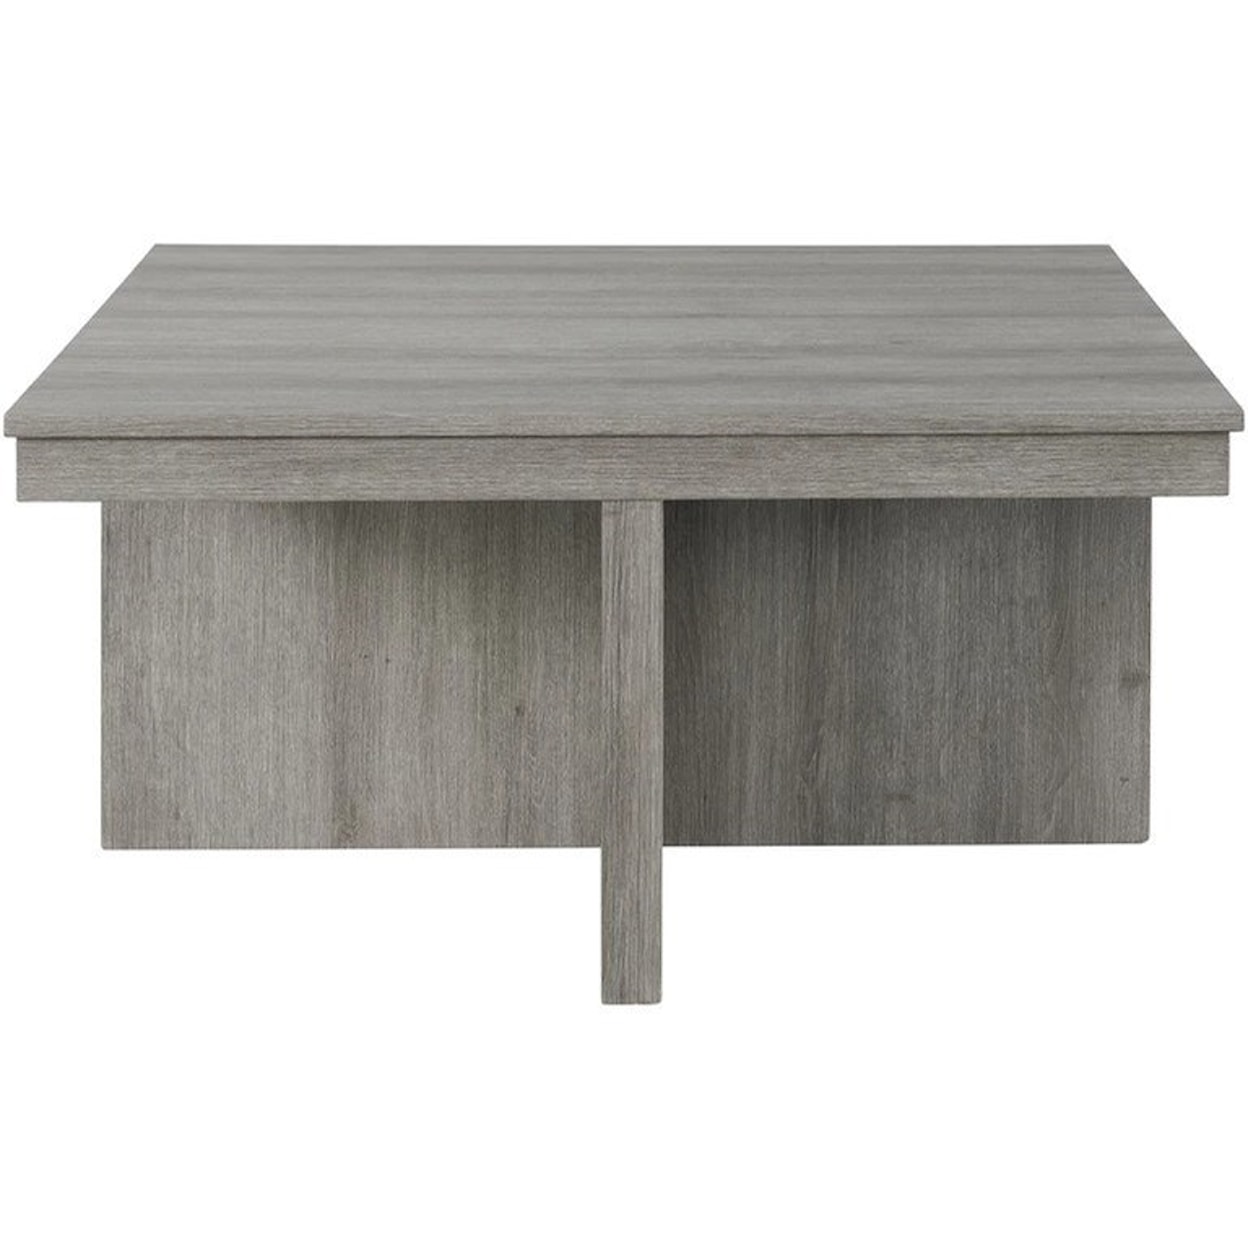 Elements International Uster Coffee Table with Nesting Stools